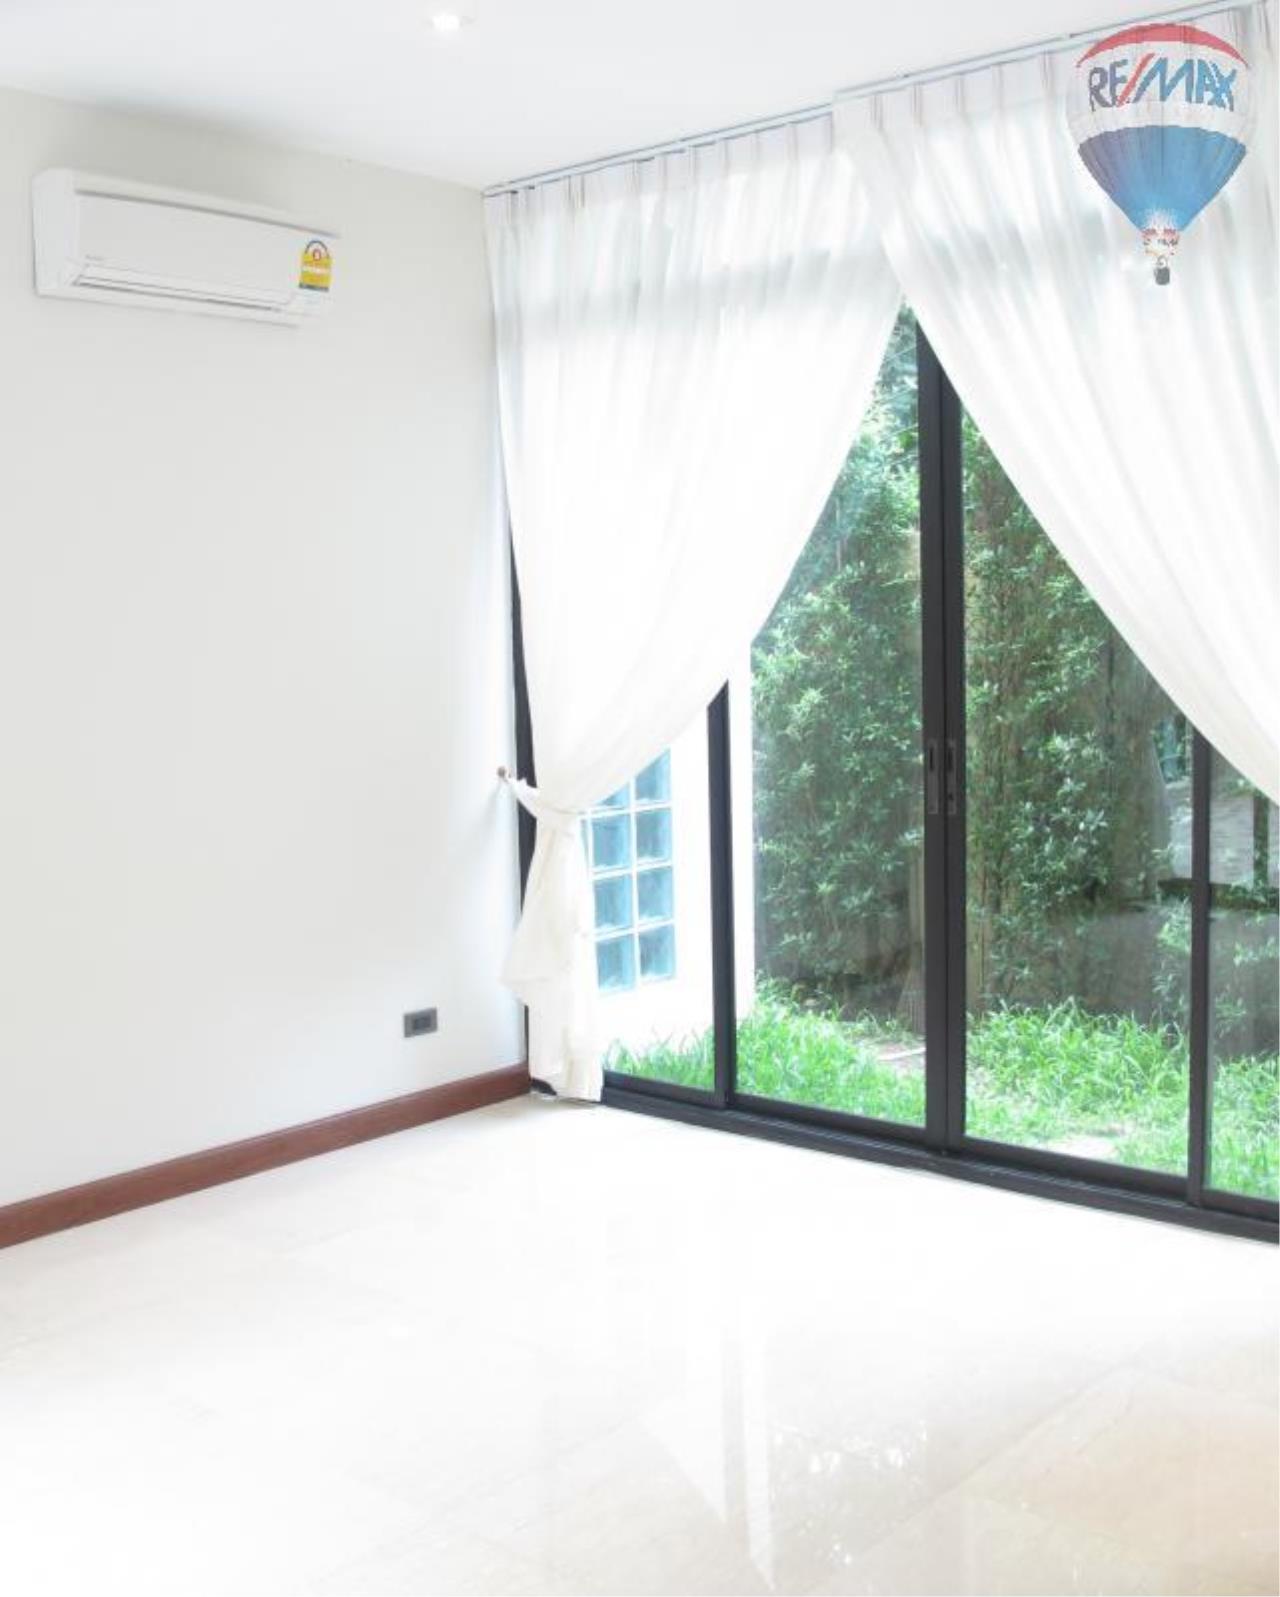 RE/MAX Properties Agency's 4 Bedroom House 530 sq.m. for Rent in Sukhumvit 24 3